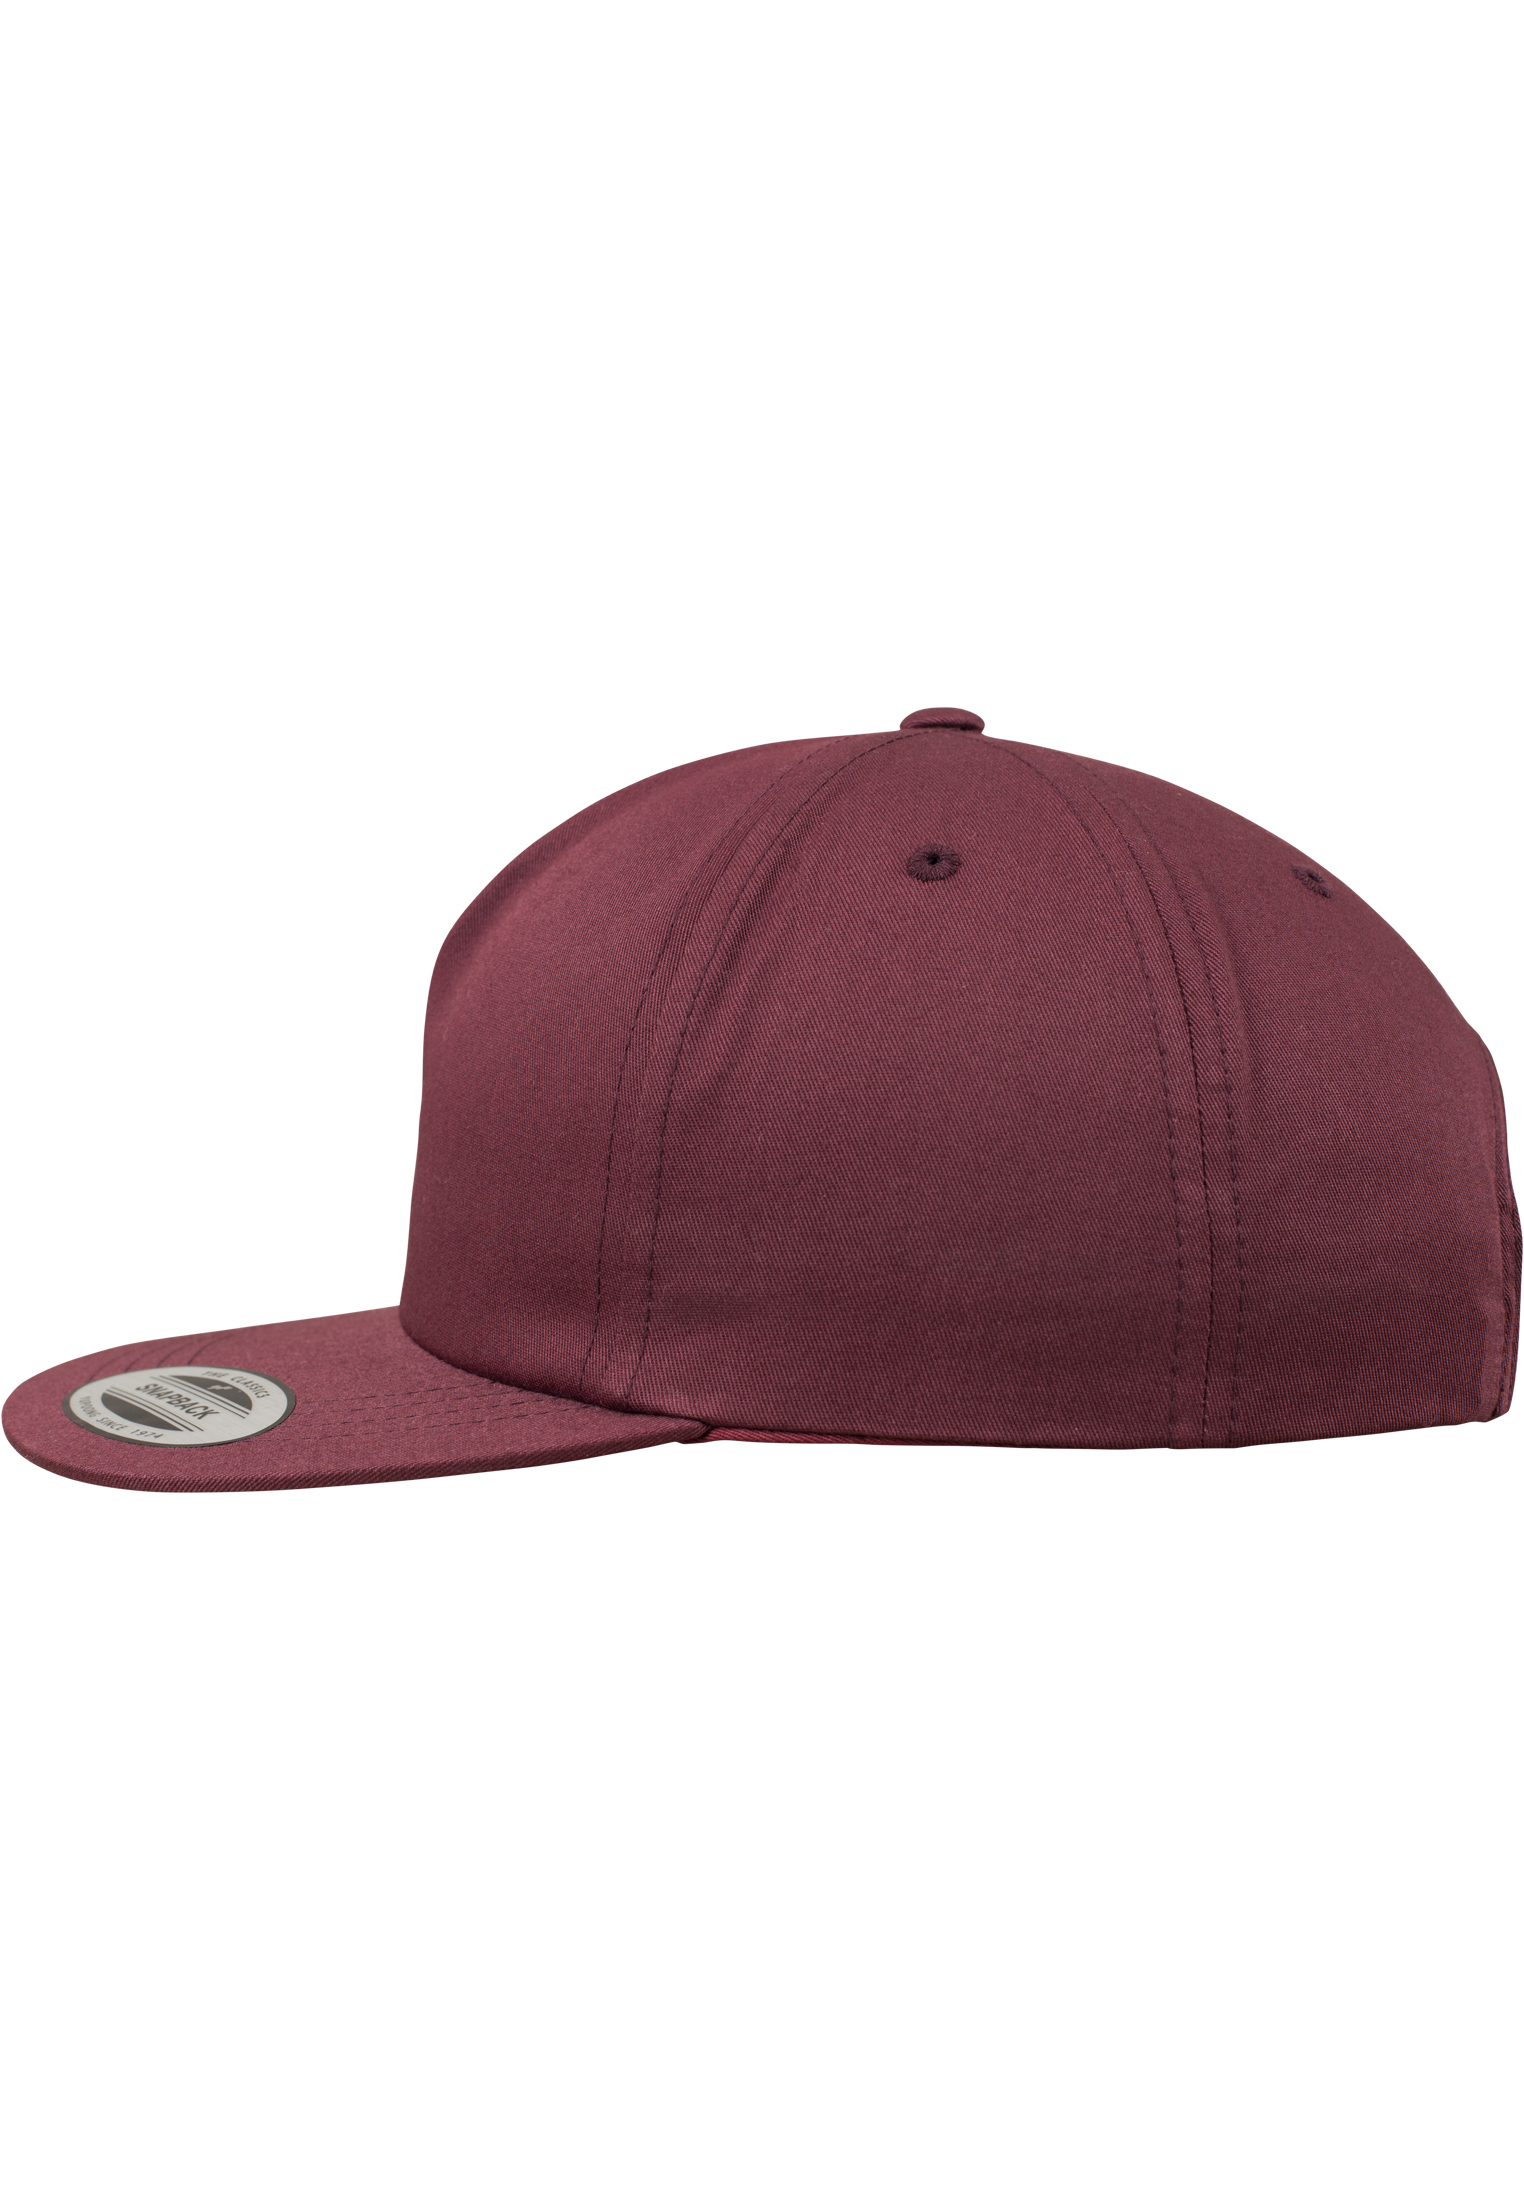 Snapback Unstructured 5-Panel Snapback in Farbe maroon